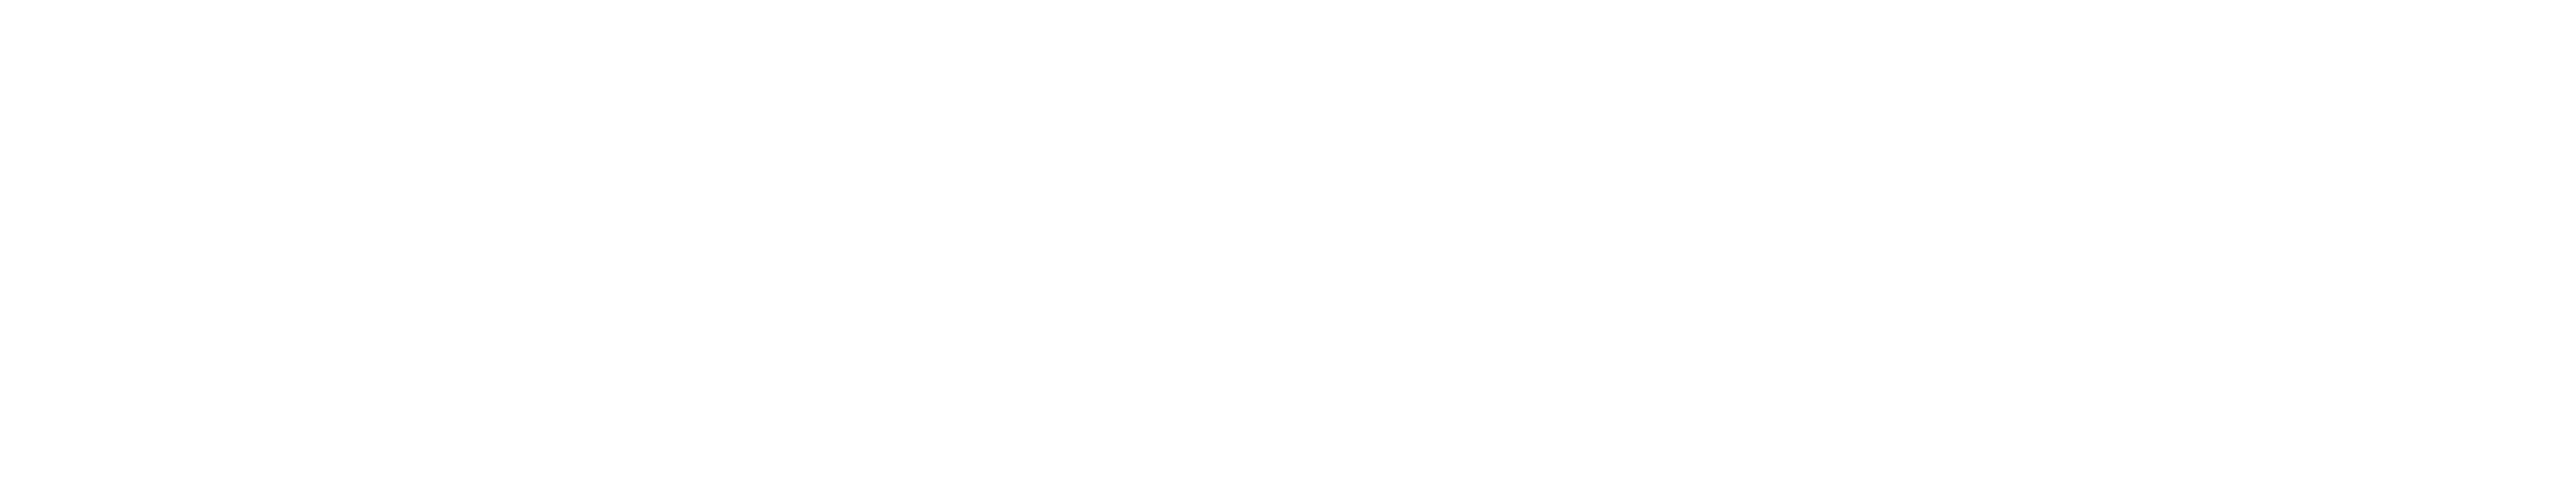 Advanced Container Recyclers